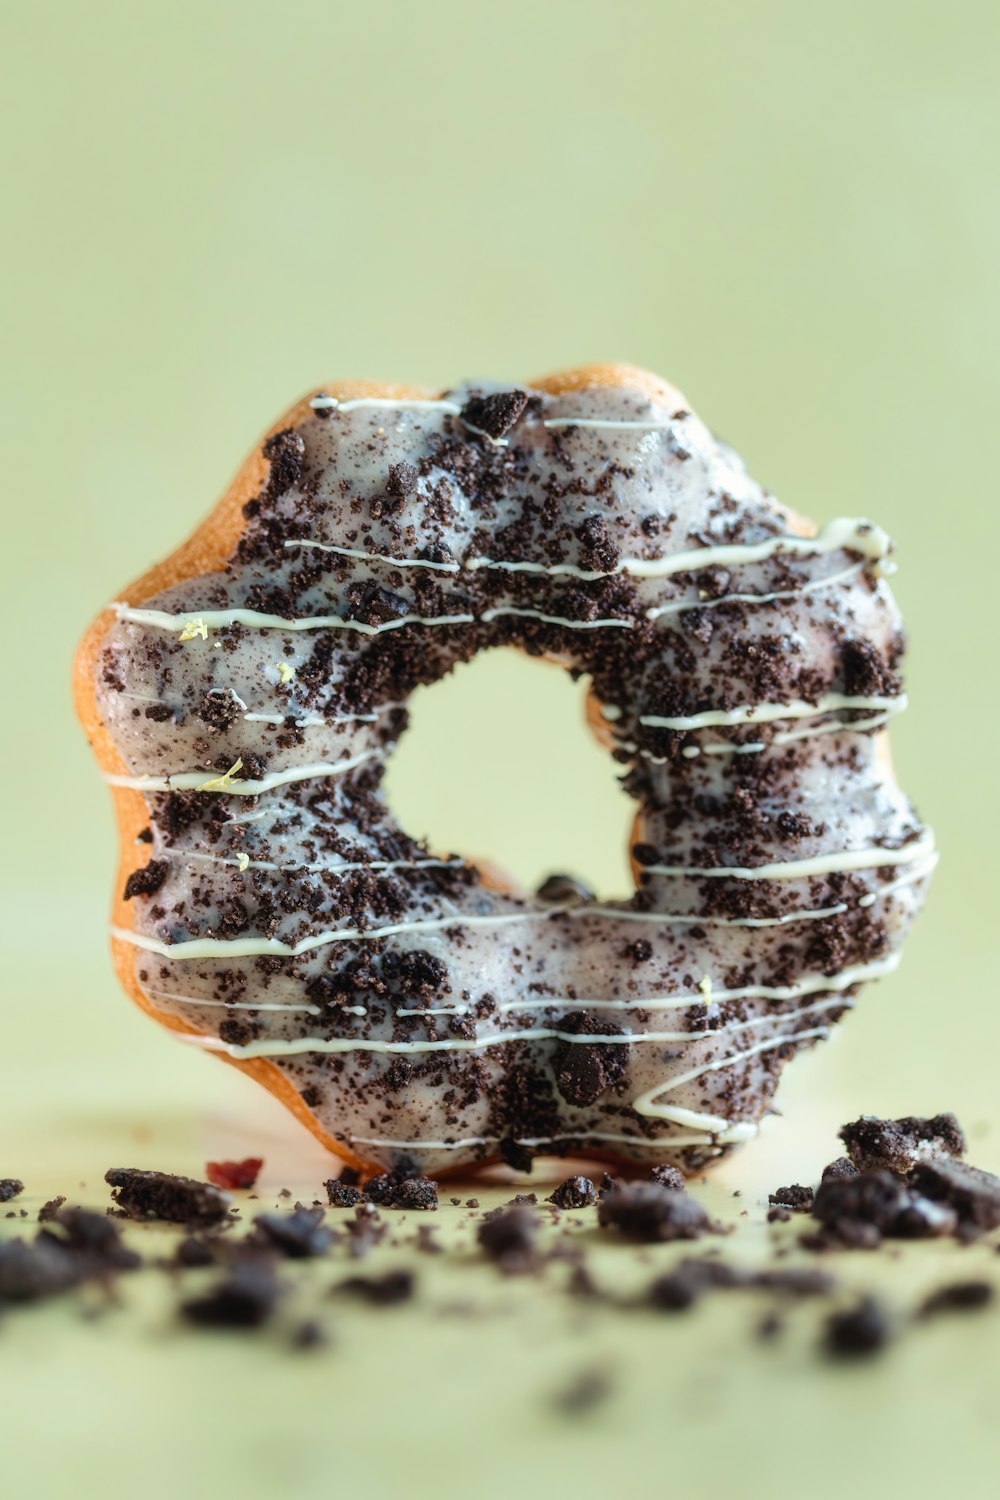 a chocolate donut with icing and chocolate chips